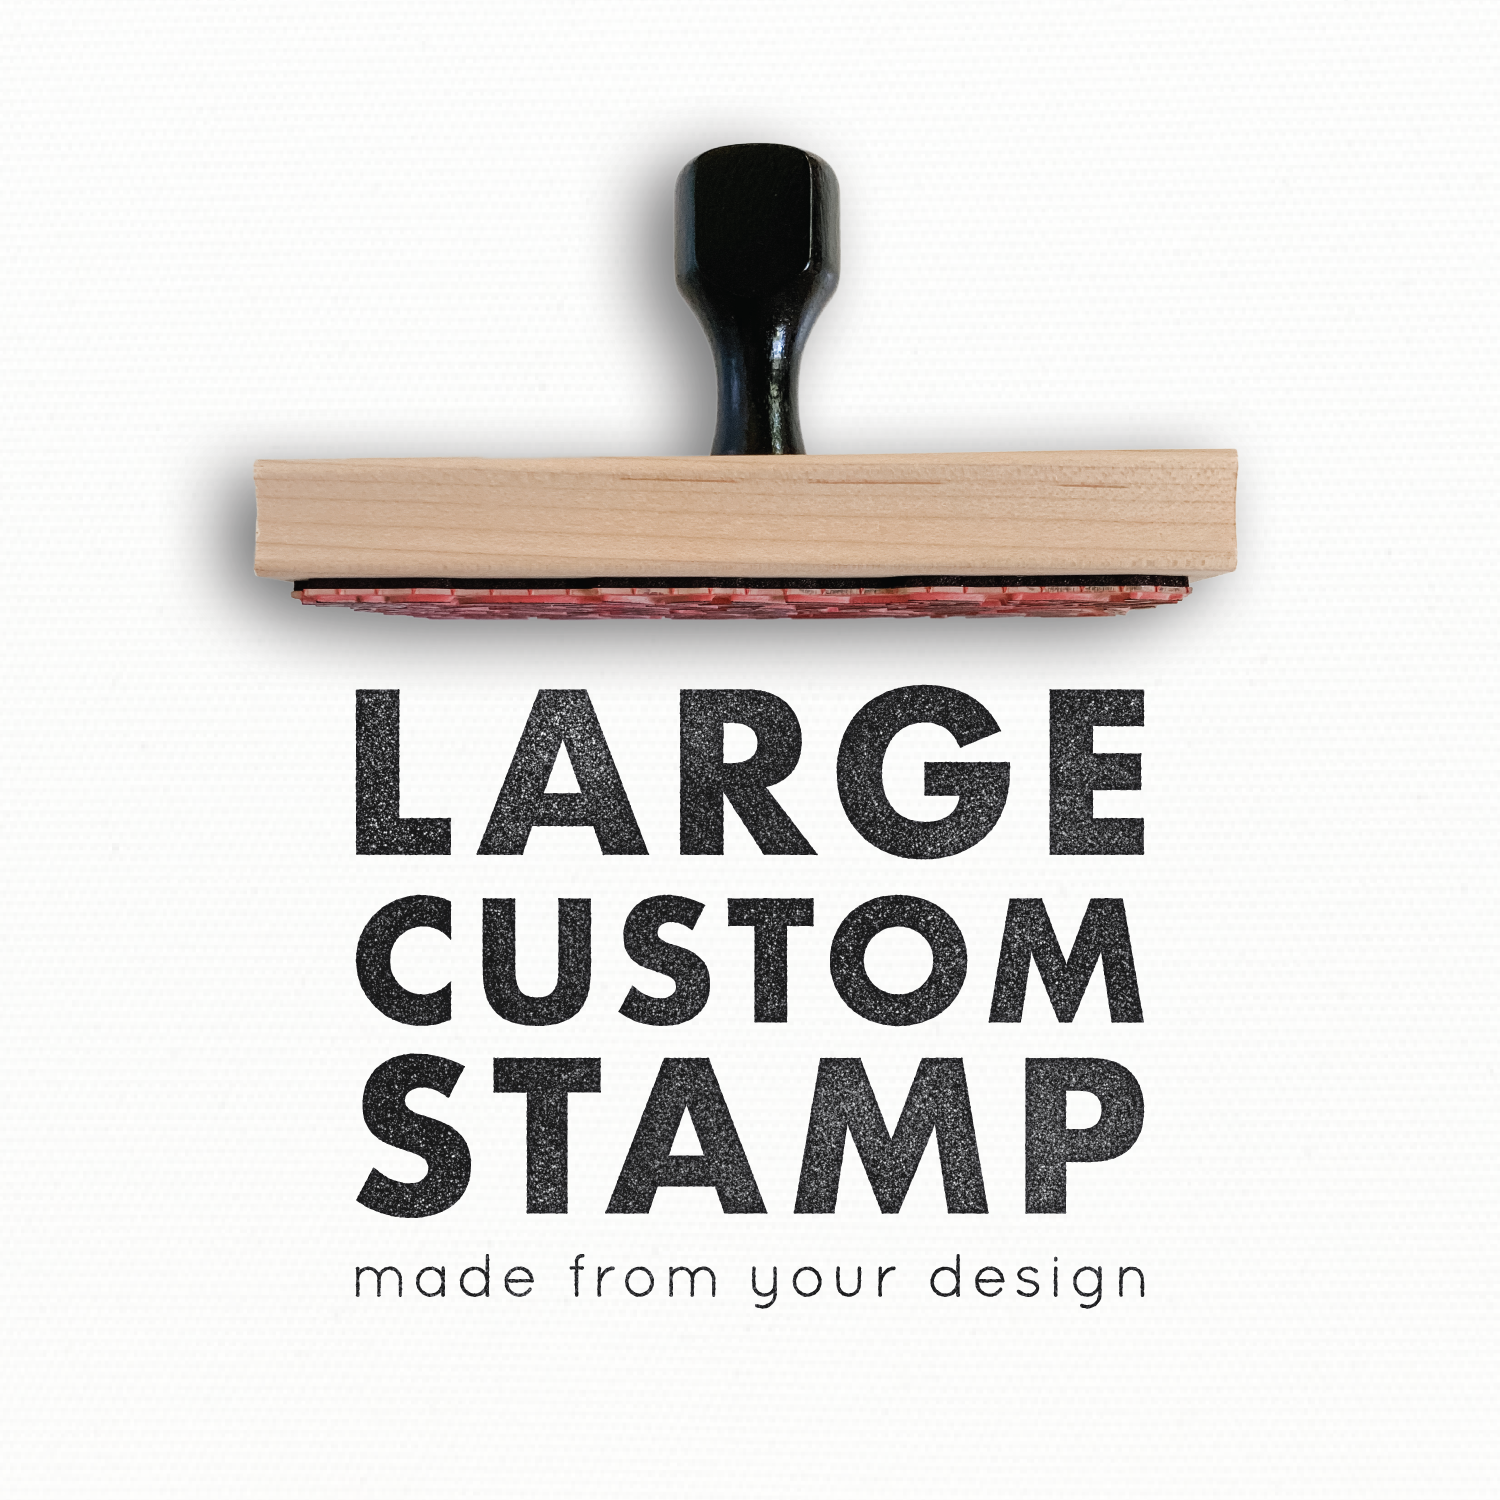 Custom Stamps Next Business Day! Rubber Stamps & Ink